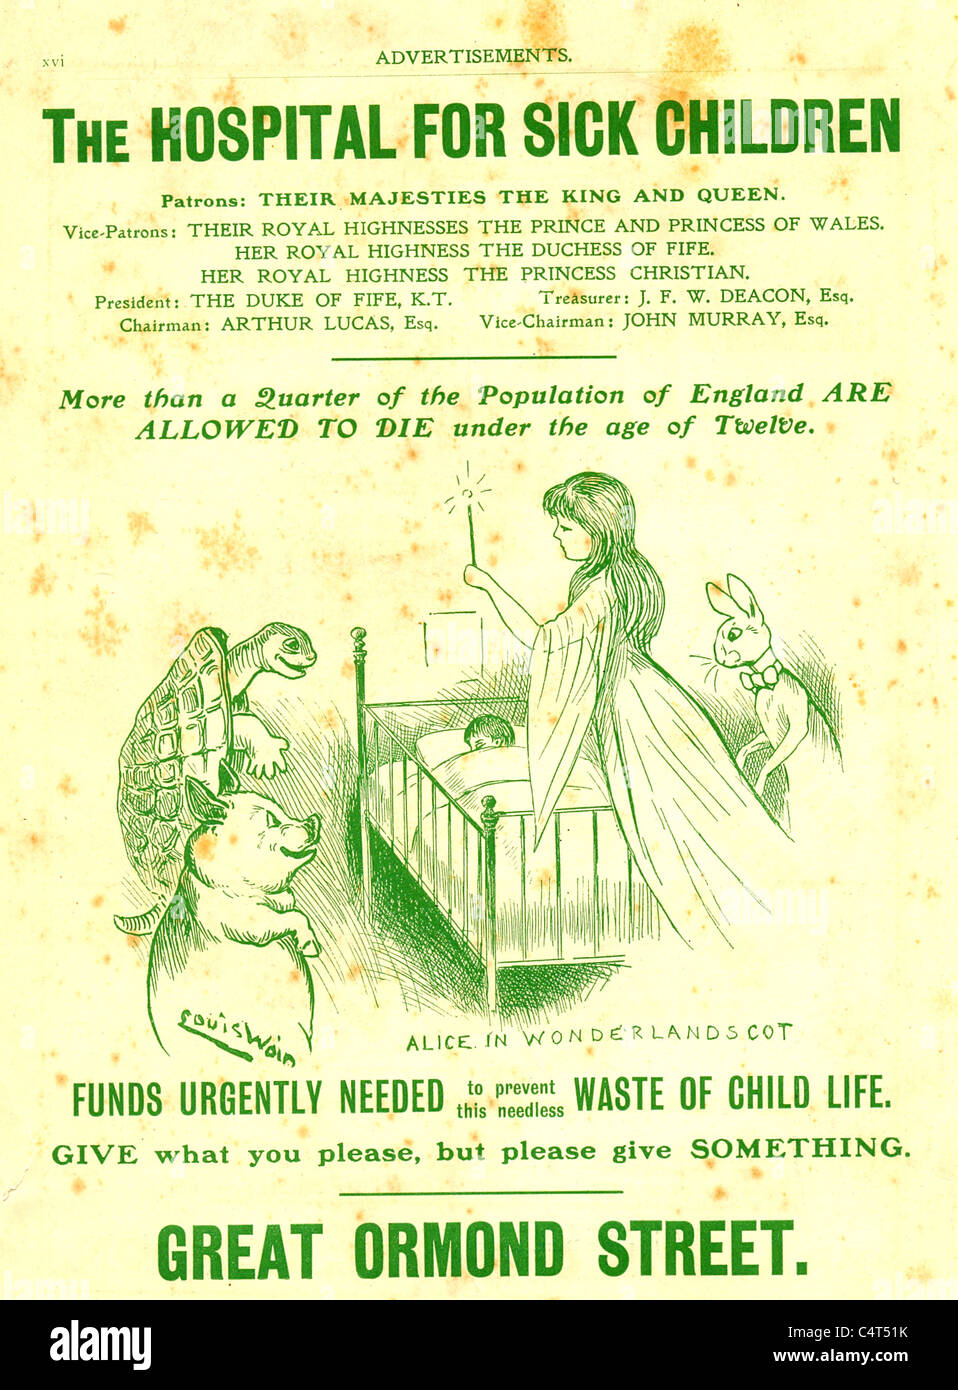 Advertisement for funds for the Hospital for Sick Children showing the Alice in Wonderland cot 1904 Stock Photo